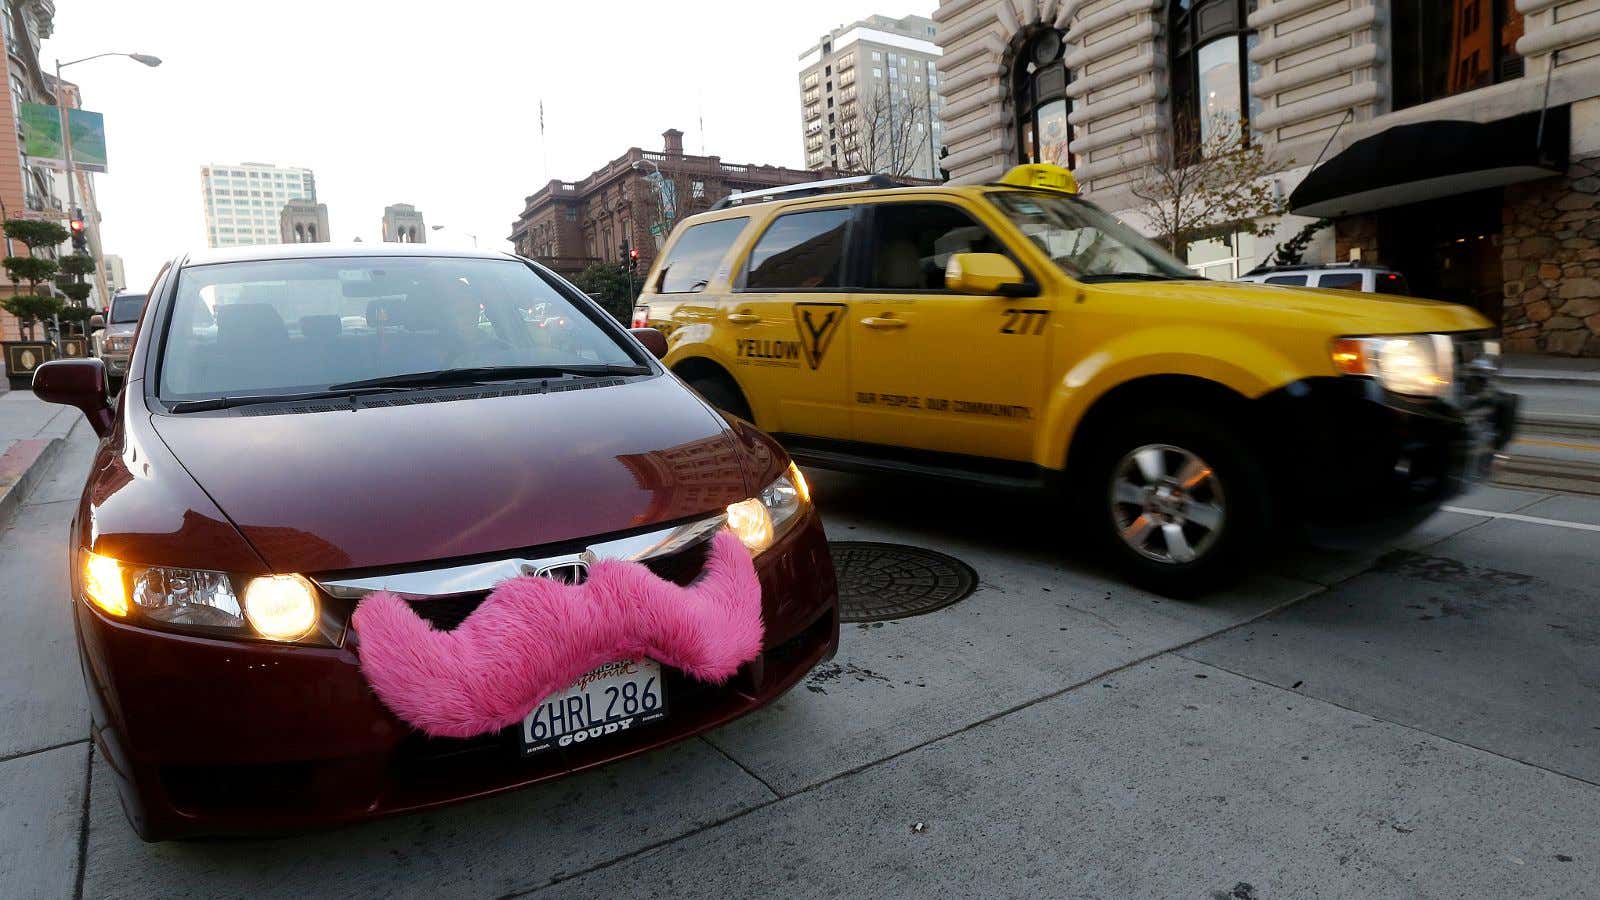 Uber has seen the enemy, and it is pink and yellow.